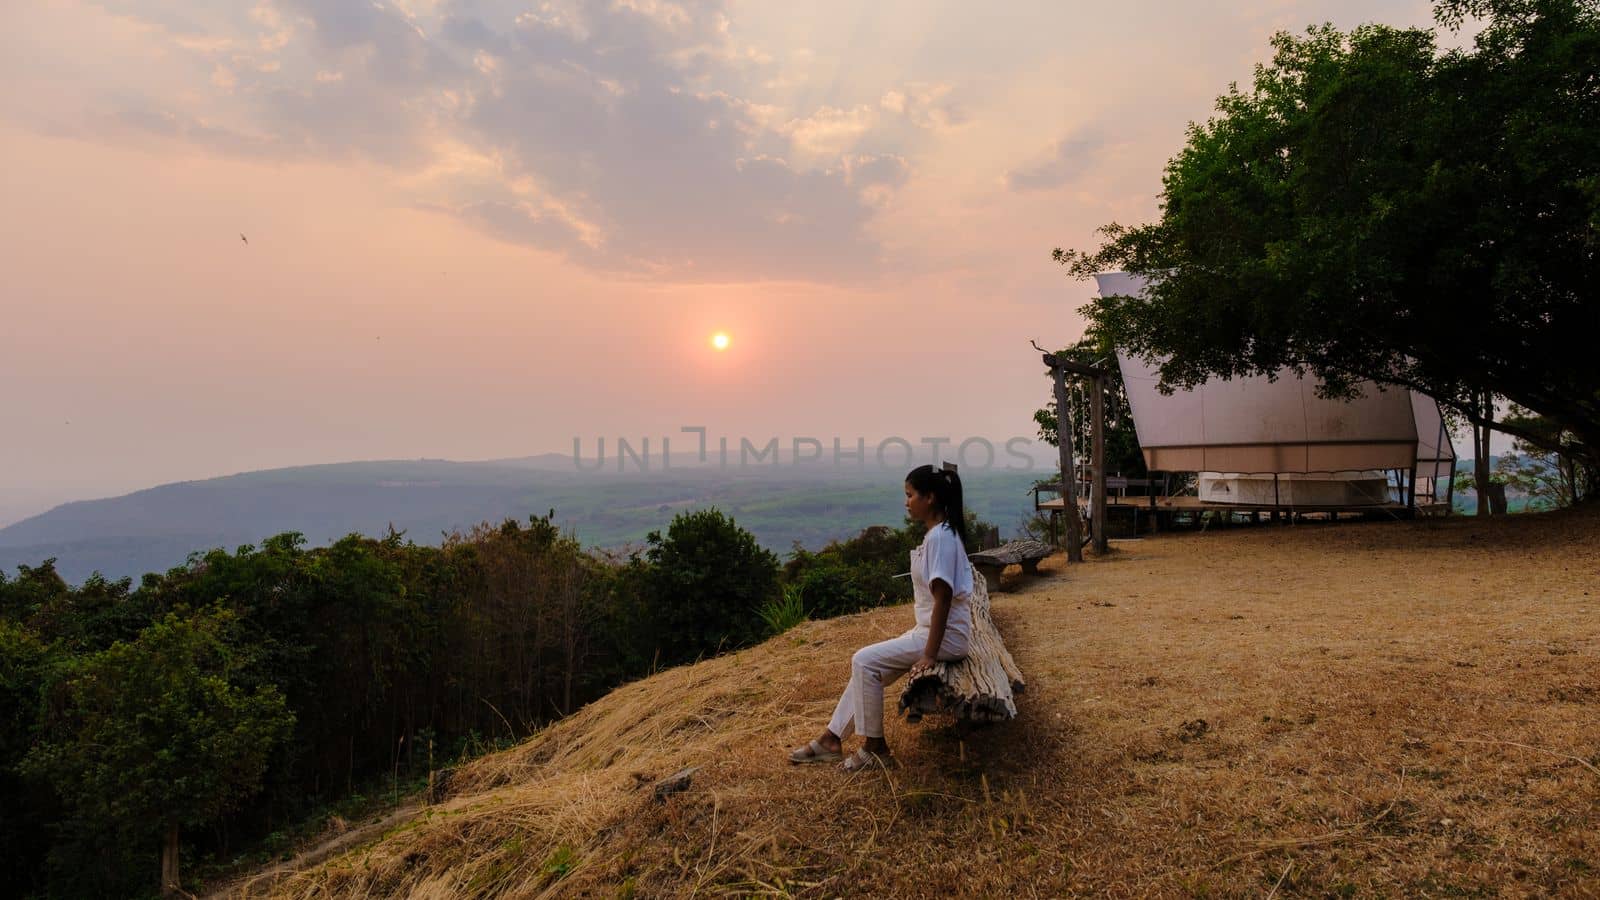 Sunset at a mountain camping in Phitsanulok Thailand. luxury glamping, Thai women watching sunset in the mountains of Northern Thailand